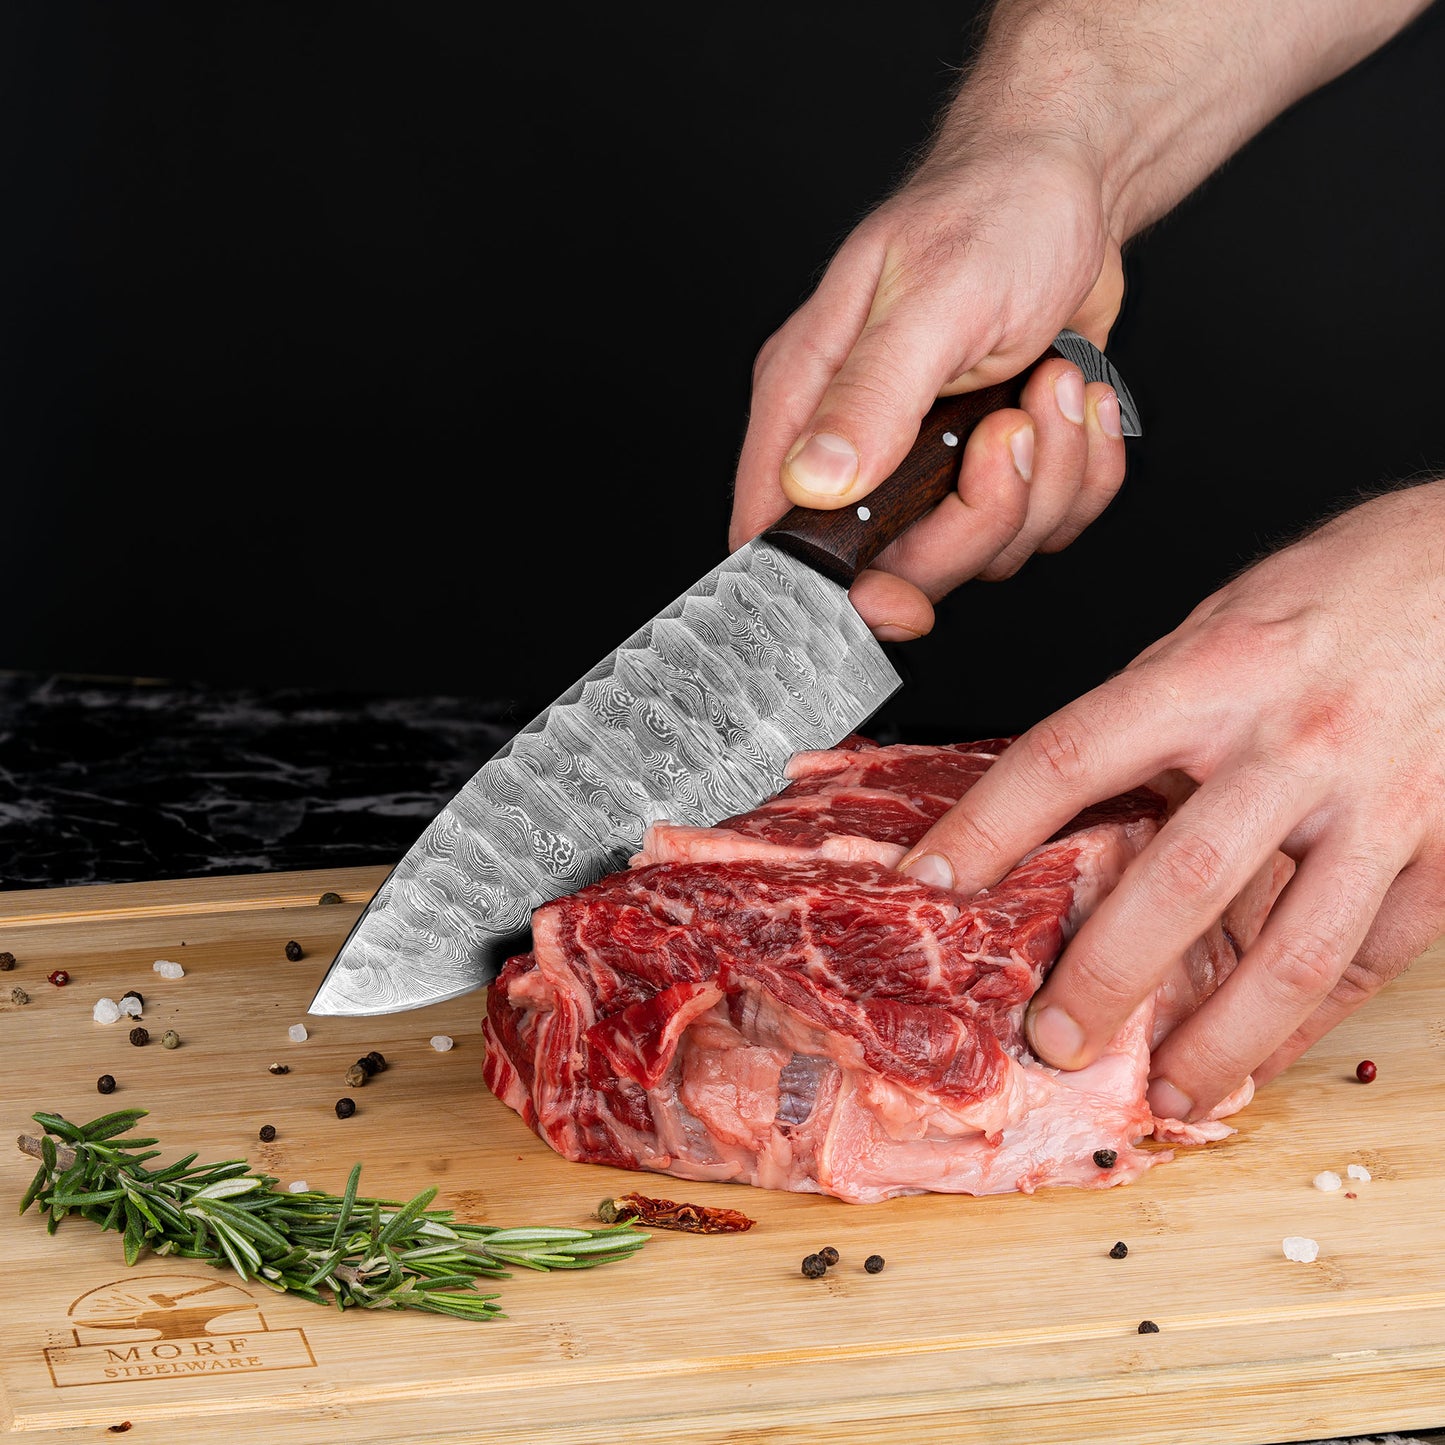 Damascus Chef Knife Slicing Beef